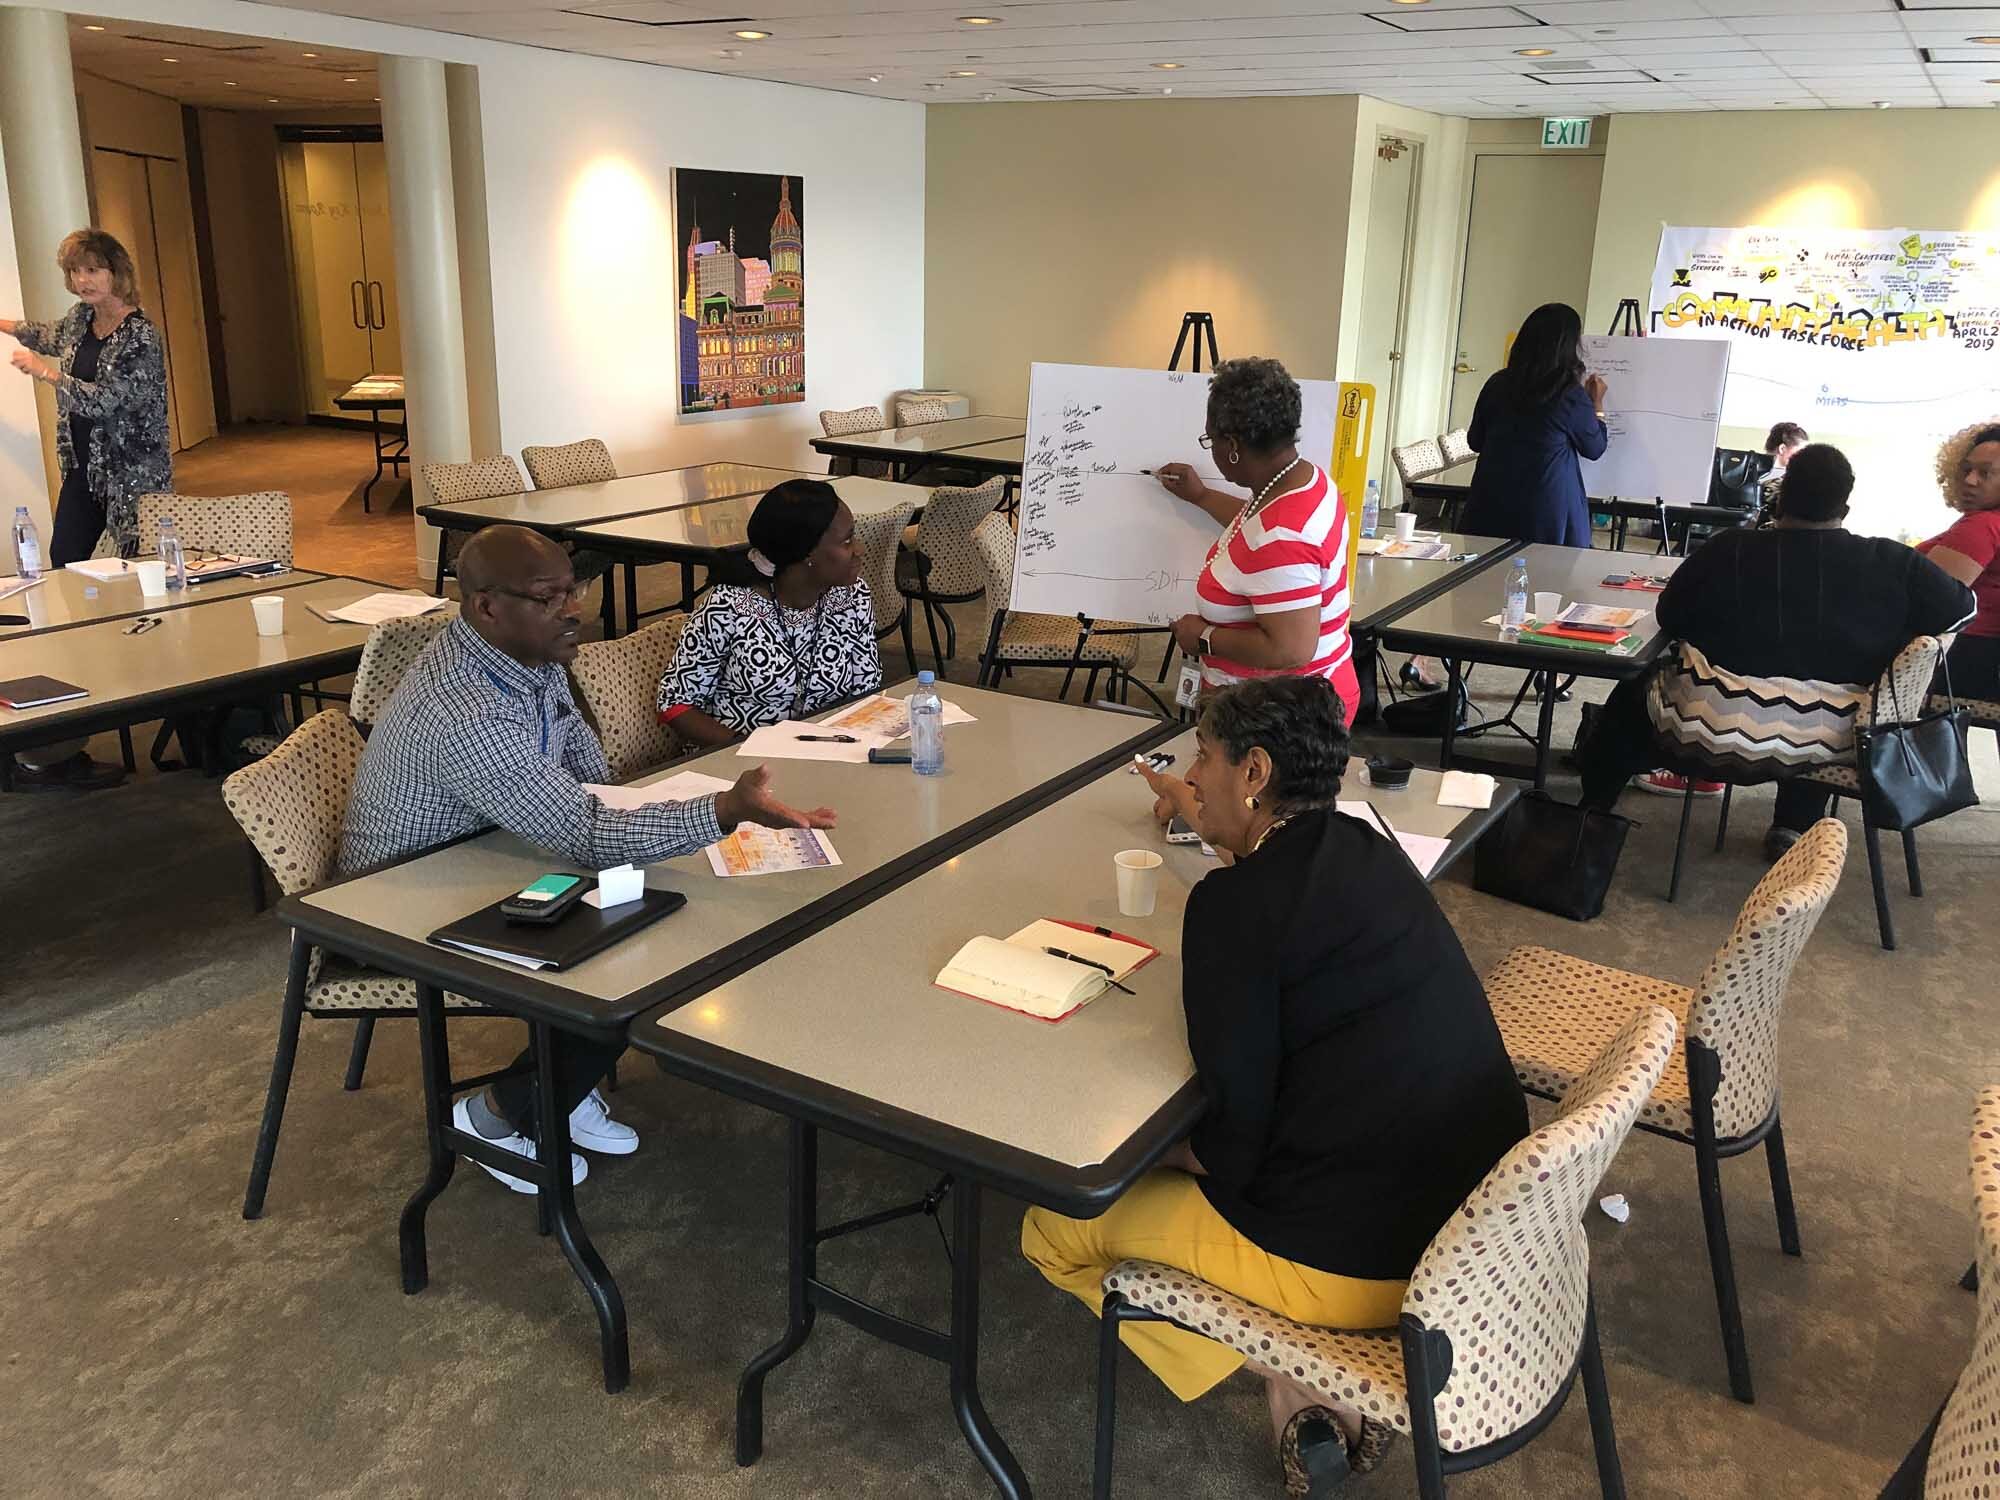  Human-centered design session by CHE team for American Health Association participants, April 2019 in Baltimore. 